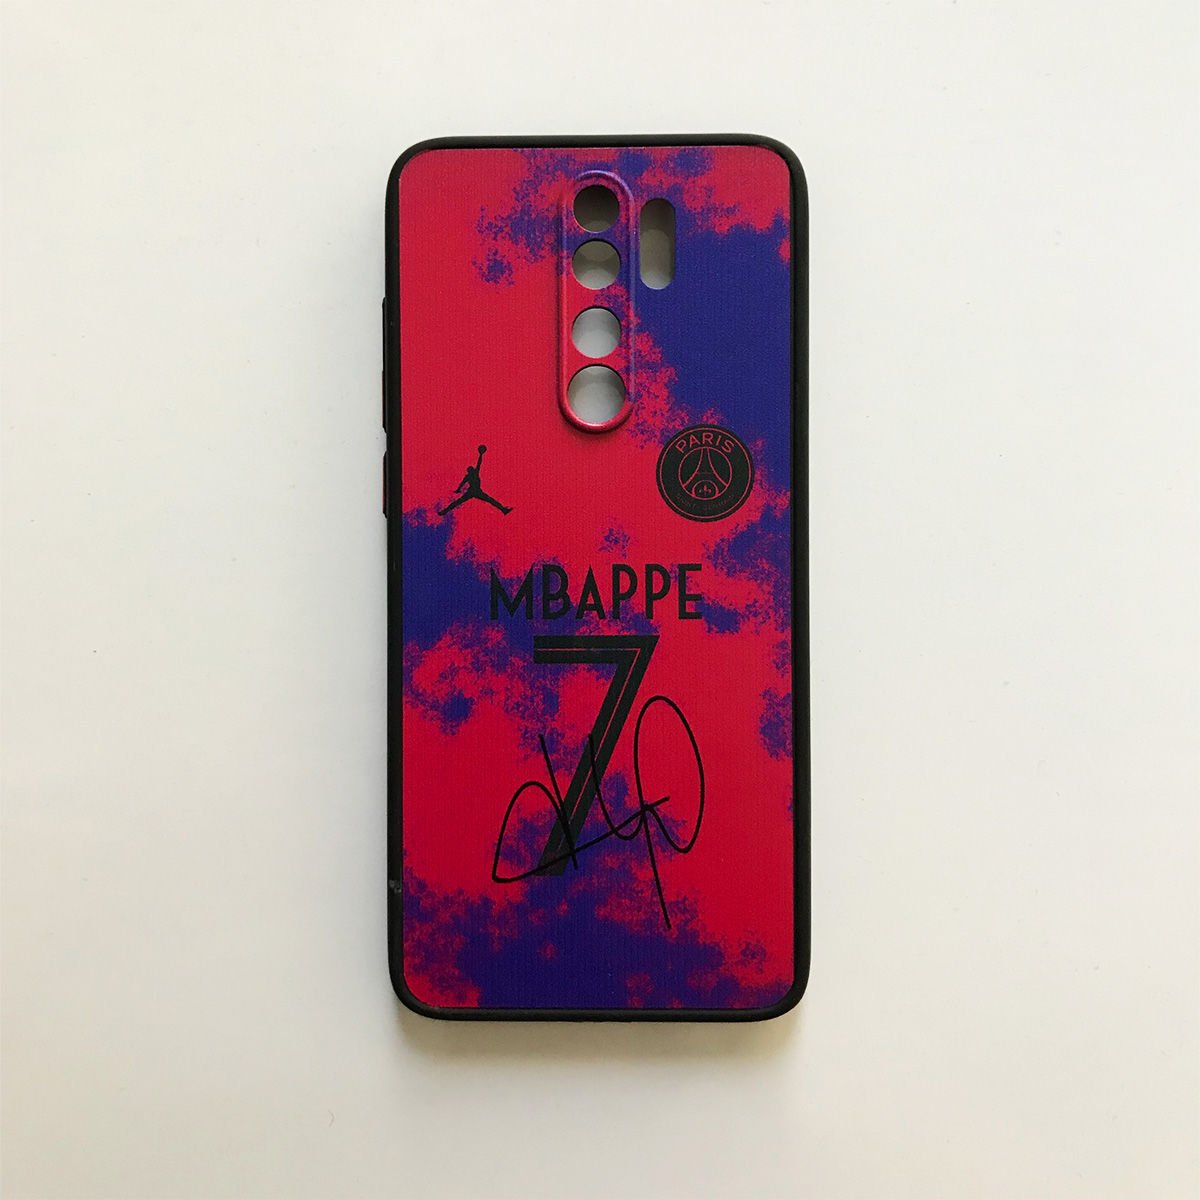 OUTLET - PSG Fourth: Mbappe - Xiaomi Note 8 Pro